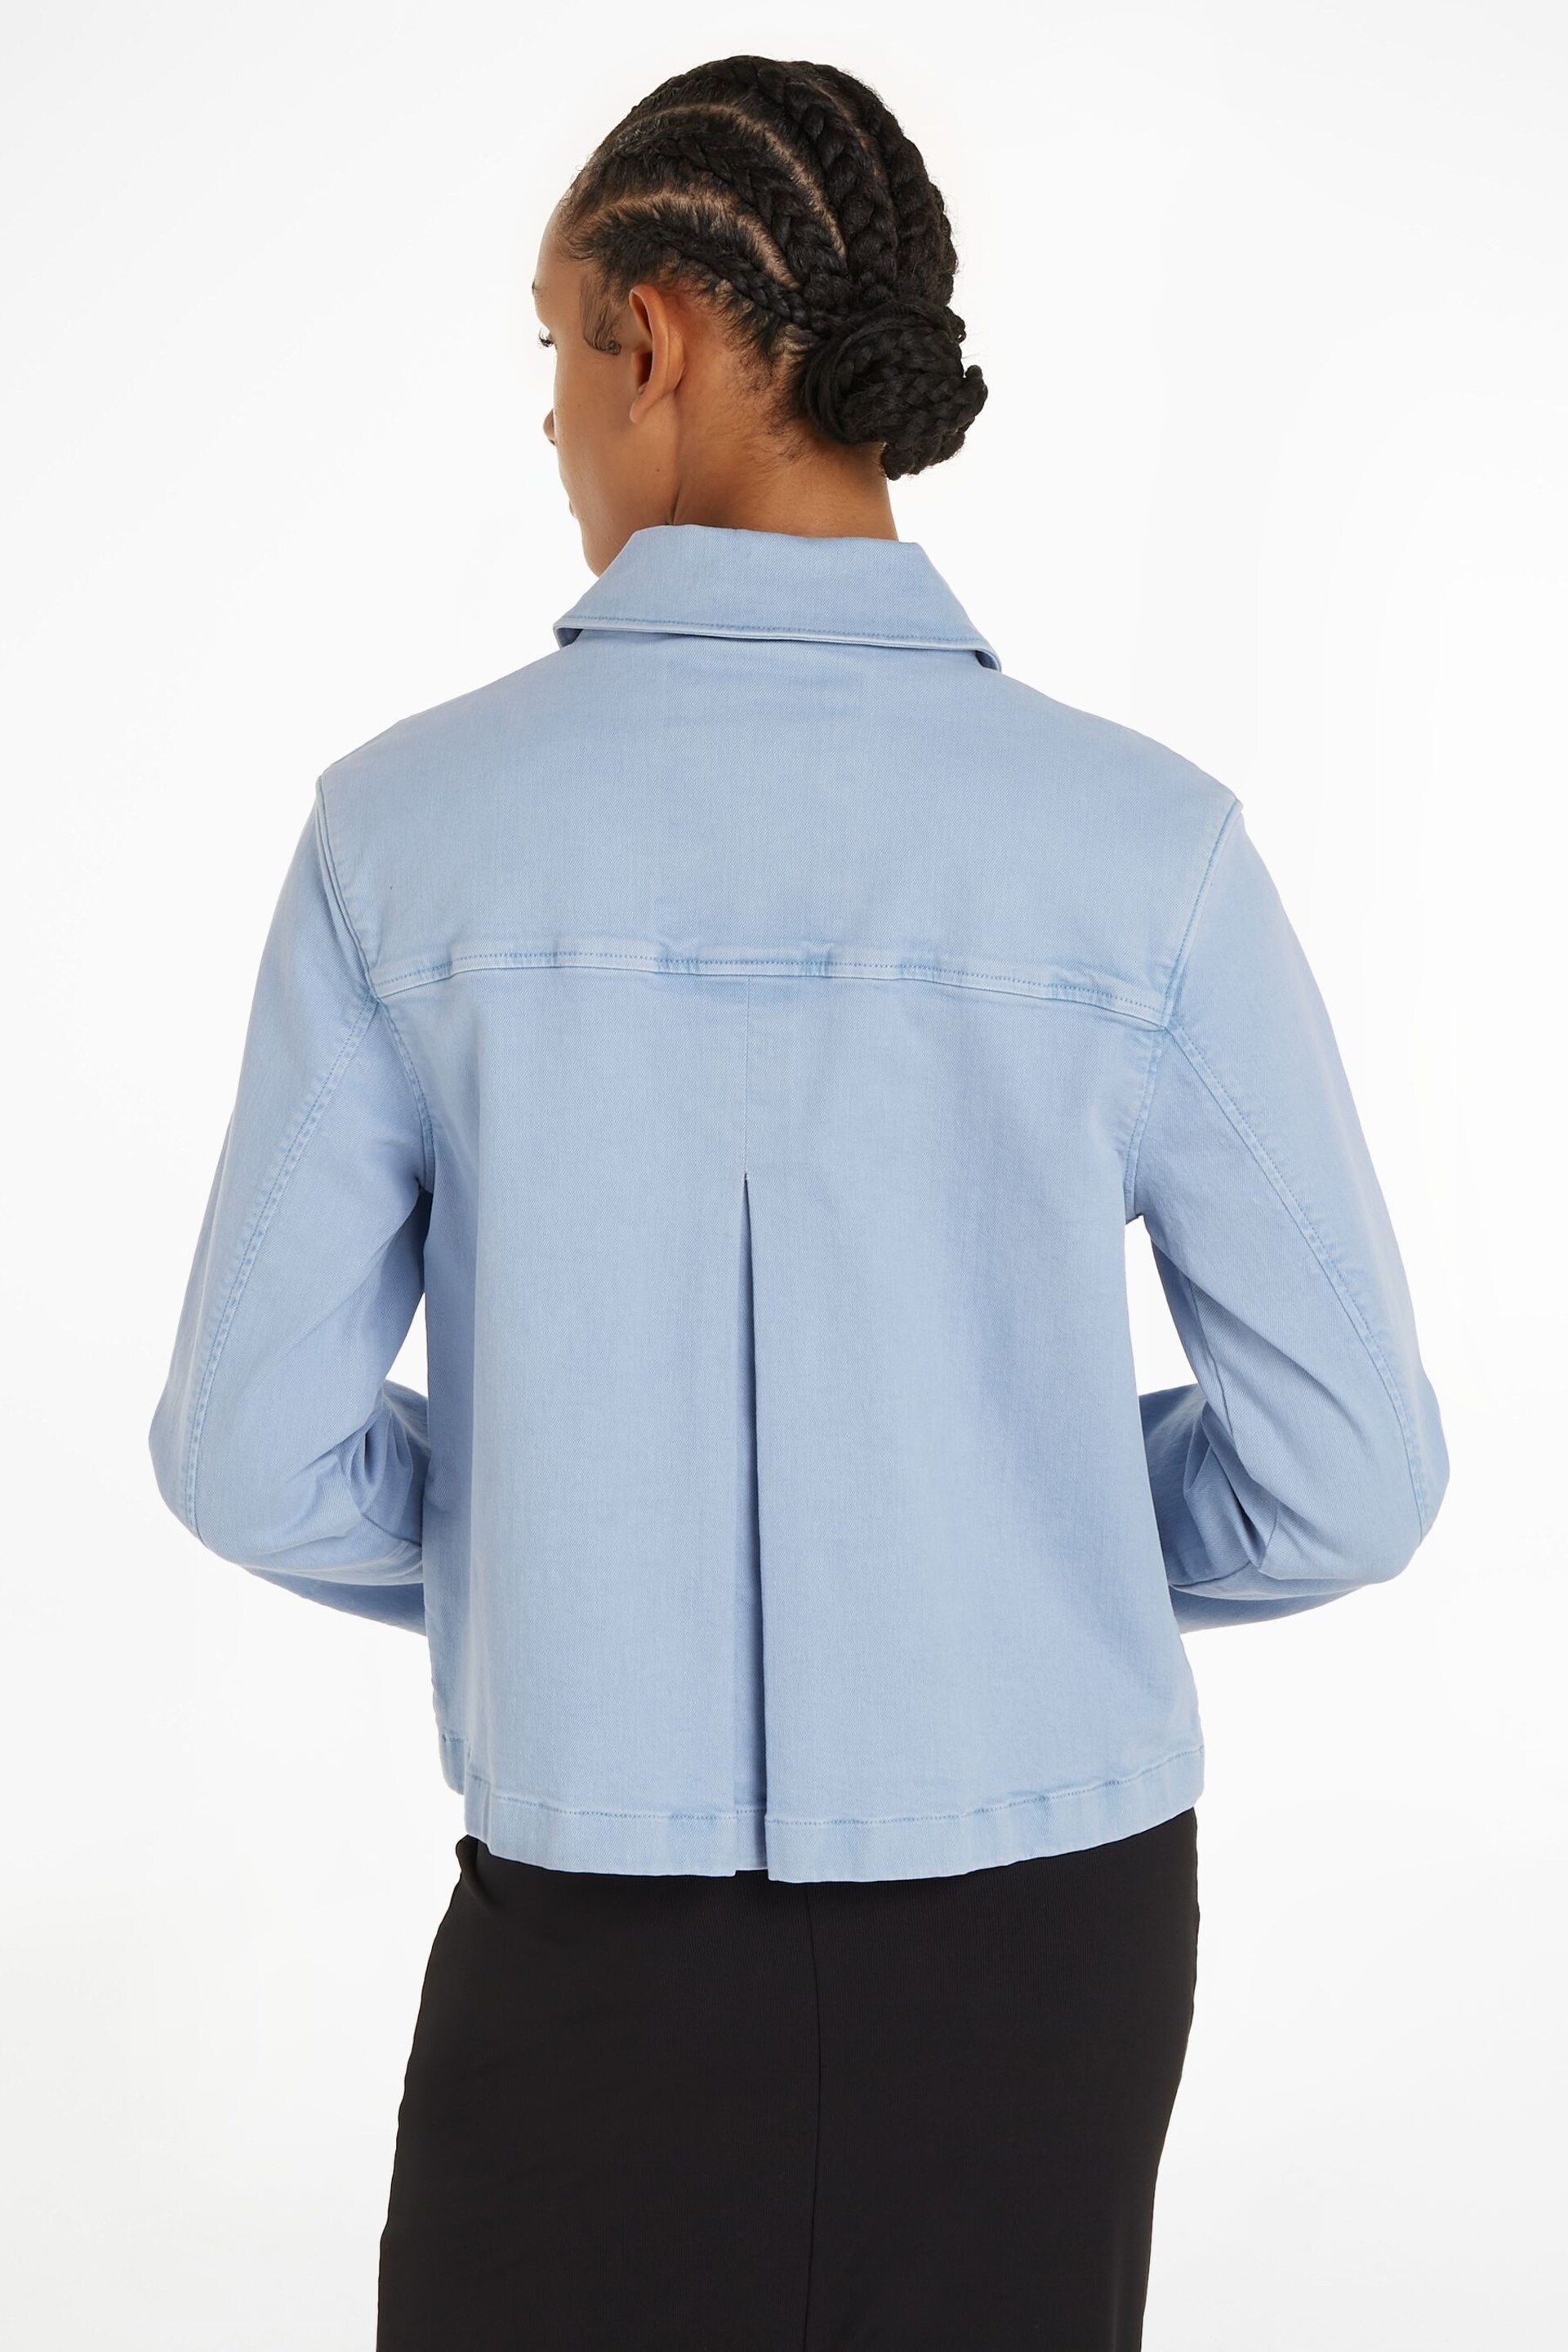 Tommy Jeans Cotton Blue Jacket - Image 2 of 6